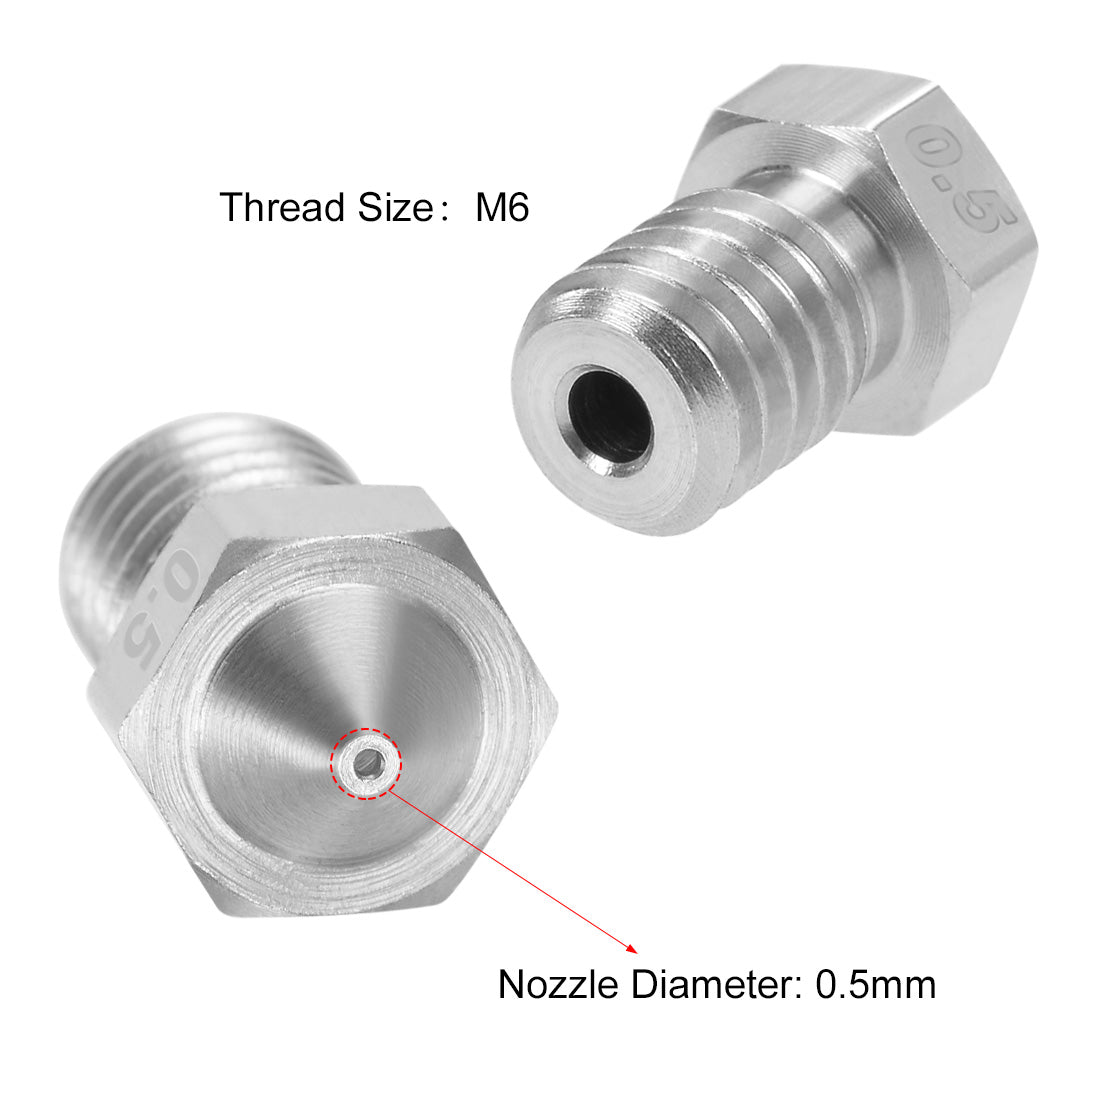 uxcell Uxcell 0.5mm 3D Printer Nozzle Head M6 for 1.75mm Extruder Print 2pcs